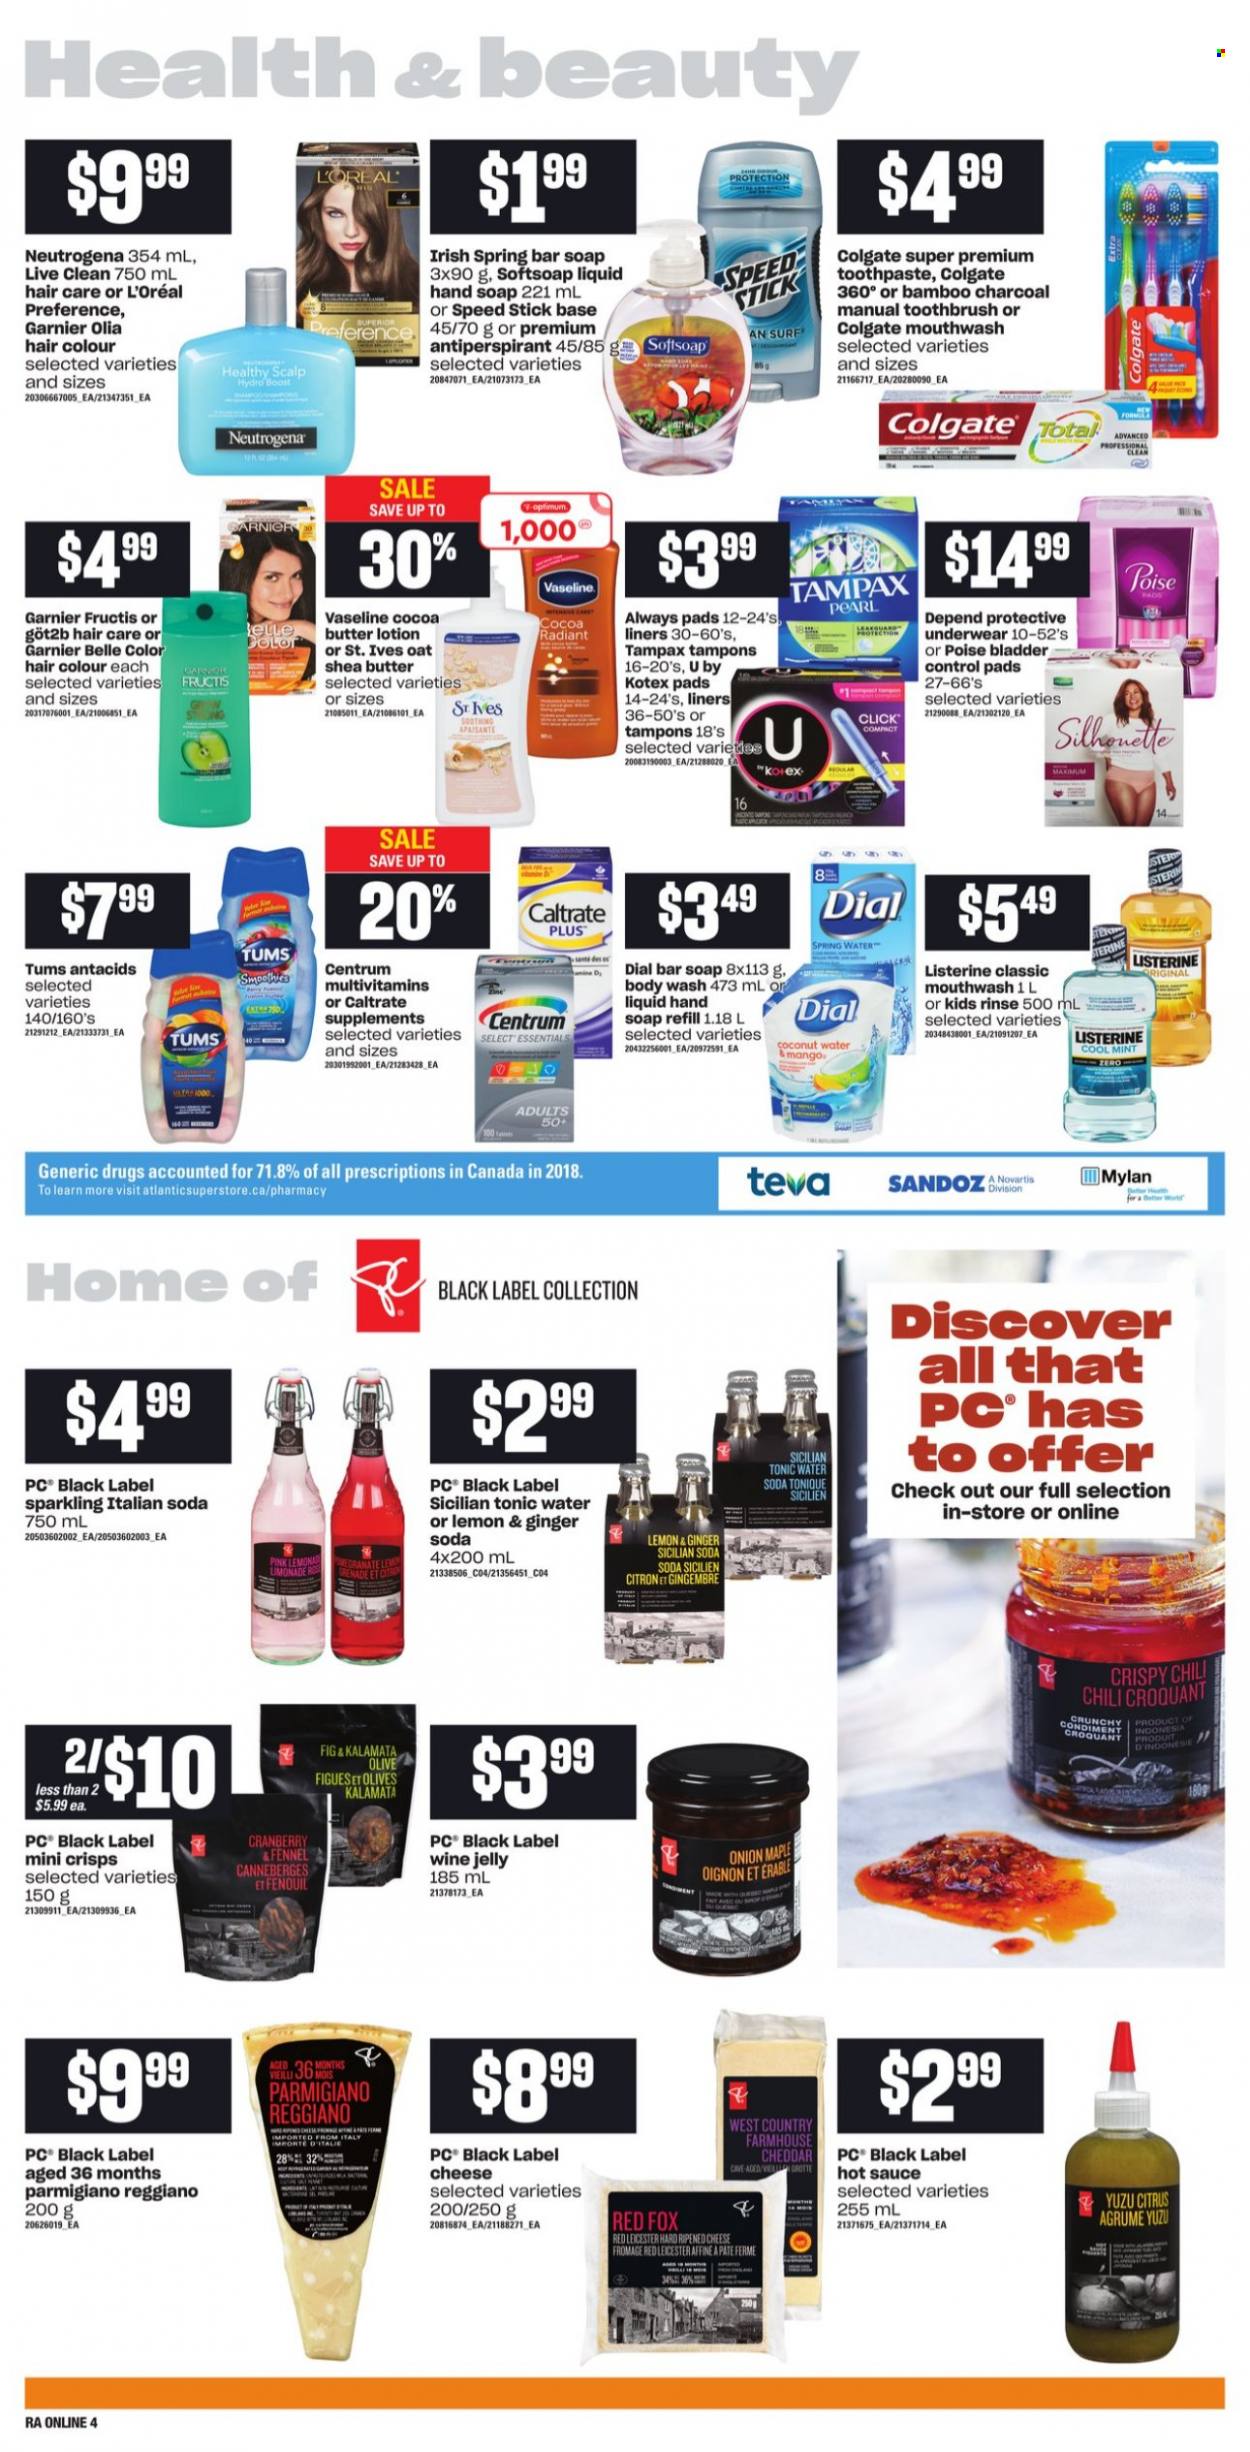 thumbnail - Atlantic Superstore Flyer - September 30, 2021 - October 06, 2021 - Sales products - onion, mango, sauce, Red Leicester, cheddar, cheese, Parmigiano Reggiano, jelly, oats, hot sauce, tonic, coconut water, spring water, soda, Boost, body wash, Softsoap, hand soap, Vaseline, soap bar, Dial, soap, toothbrush, toothpaste, mouthwash, Always pads, Kotex, Kotex pads, tampons, L’Oréal, hair color, Fructis, body lotion, shea butter, anti-perspirant, Speed Stick, Sure, pet bed, Optimum, multivitamin, Centrum, Colgate, Garnier, Listerine, Neutrogena, Tampax, olives. Page 10.